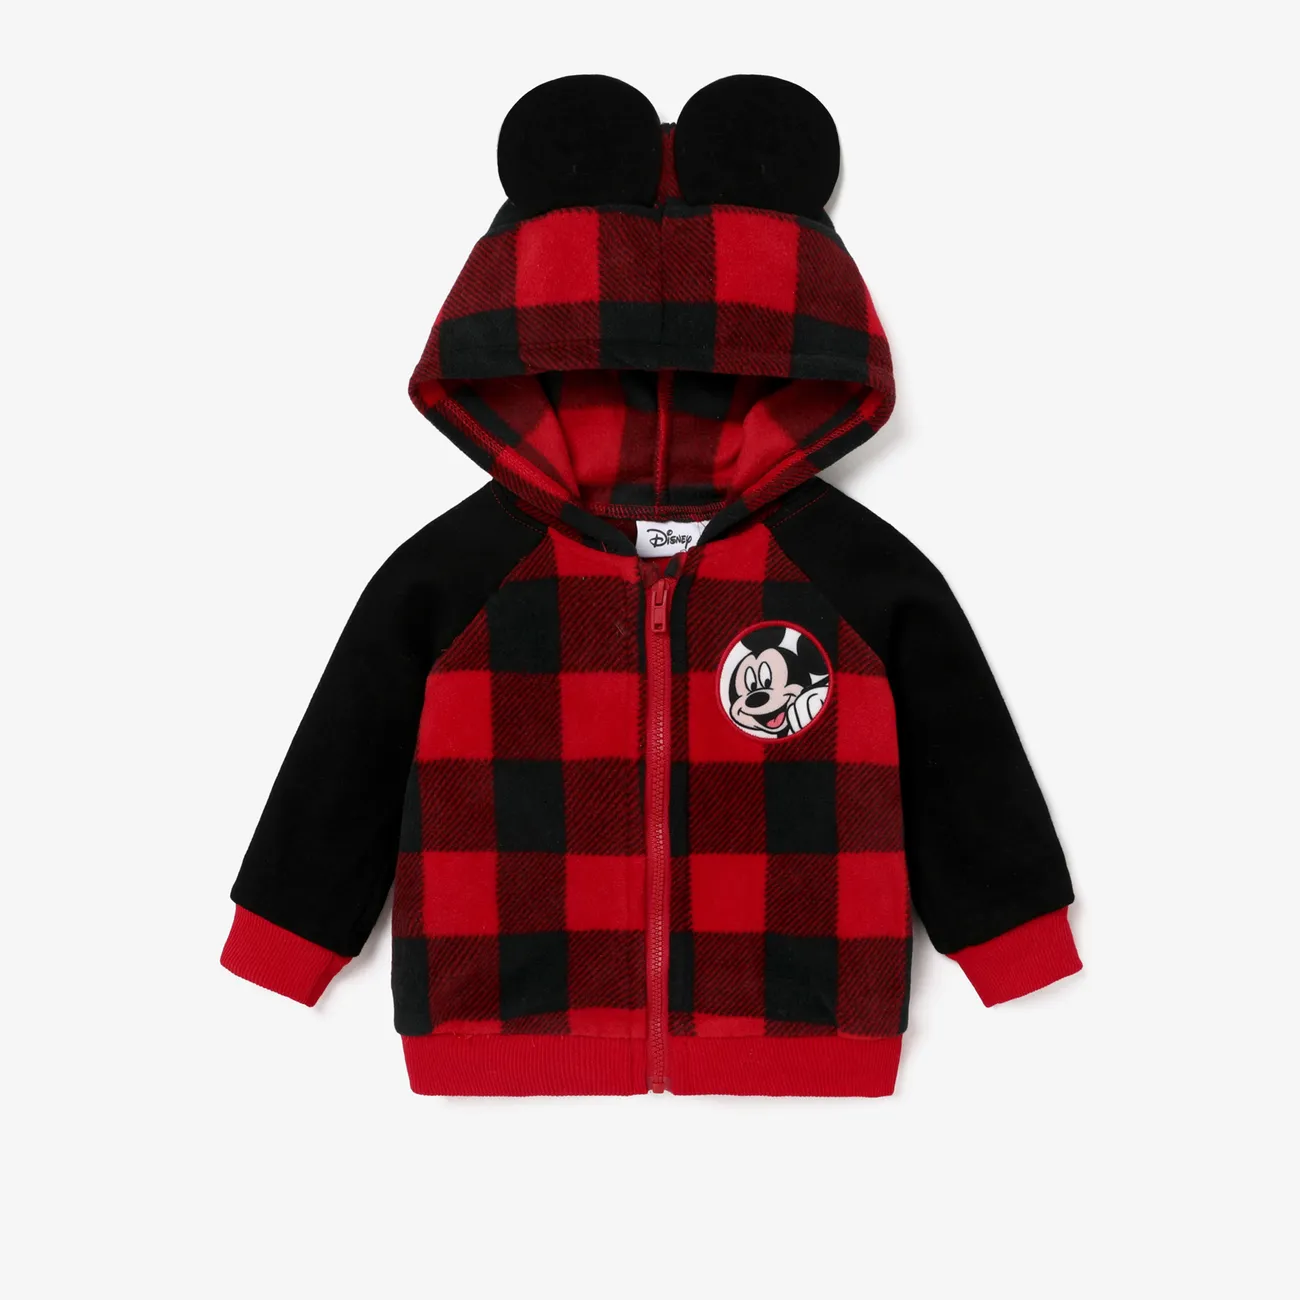 Disney Mickey and Friends Baby Boy Character Graphics 1 Jumpsuit or 1 Polar Fleece 3D Ear Jacket or 1 Track Pants Red big image 1